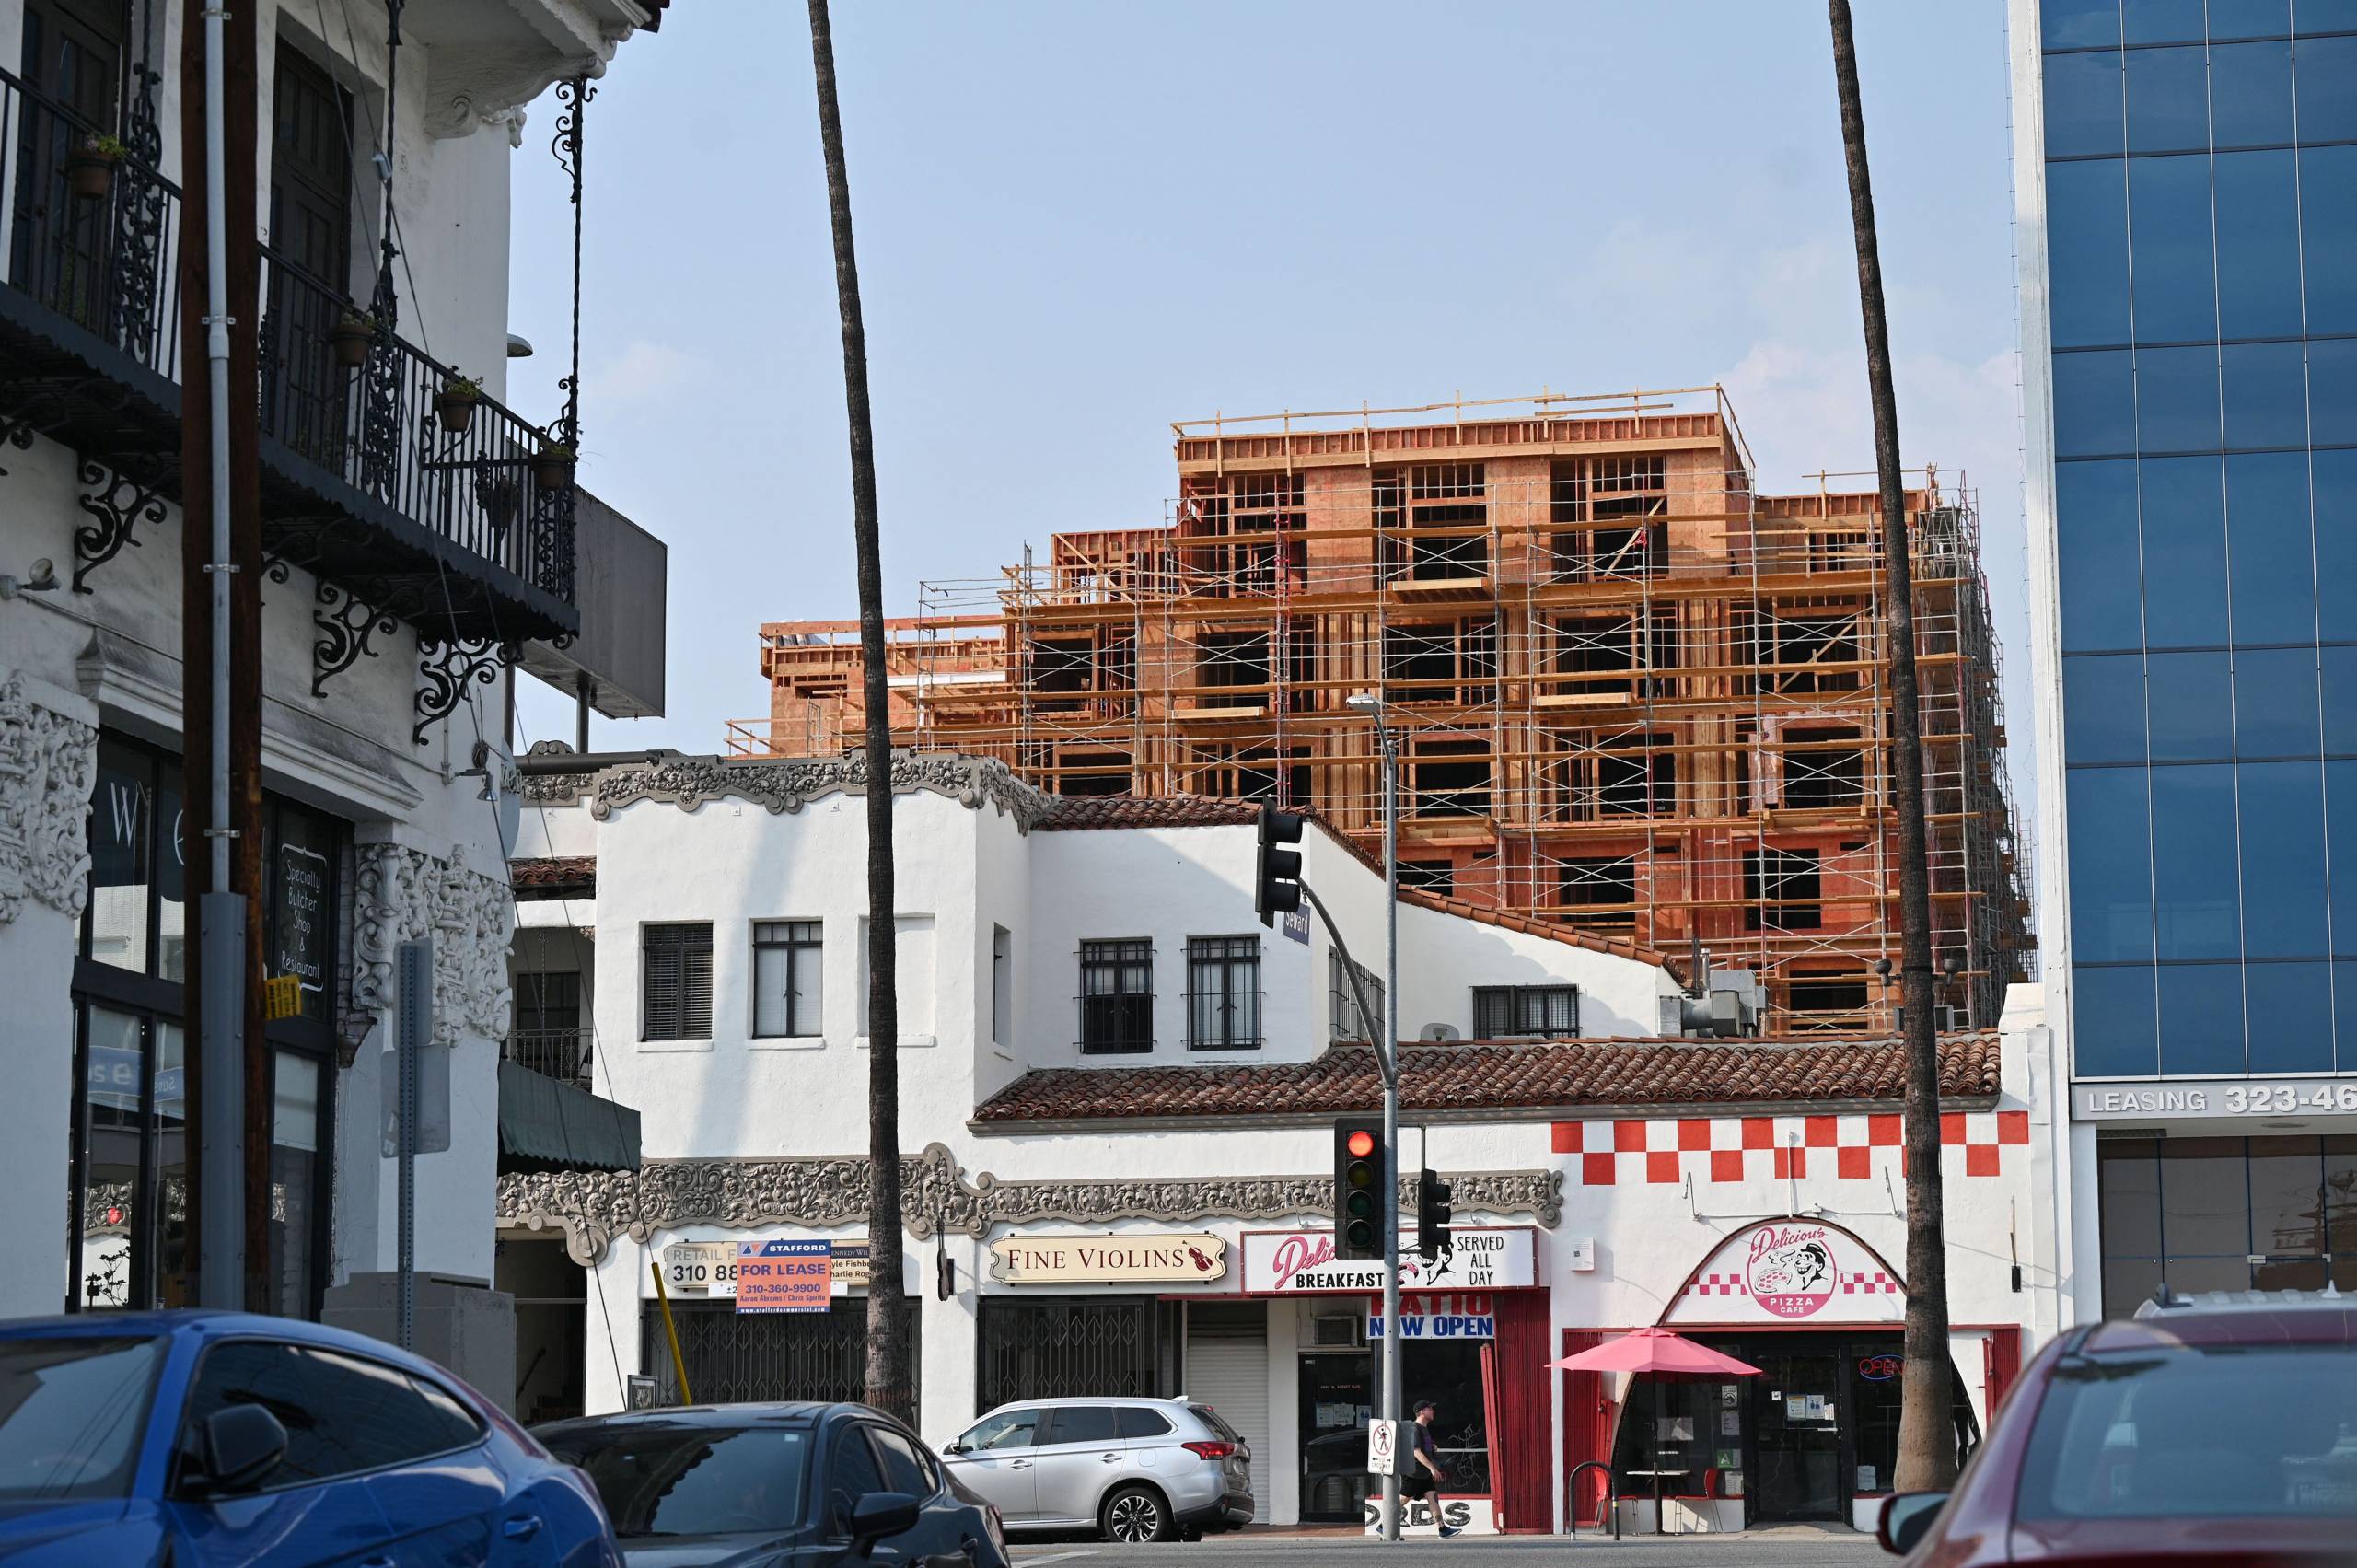 A wooden facade with scaffolding towers over the older, more residential buildings.